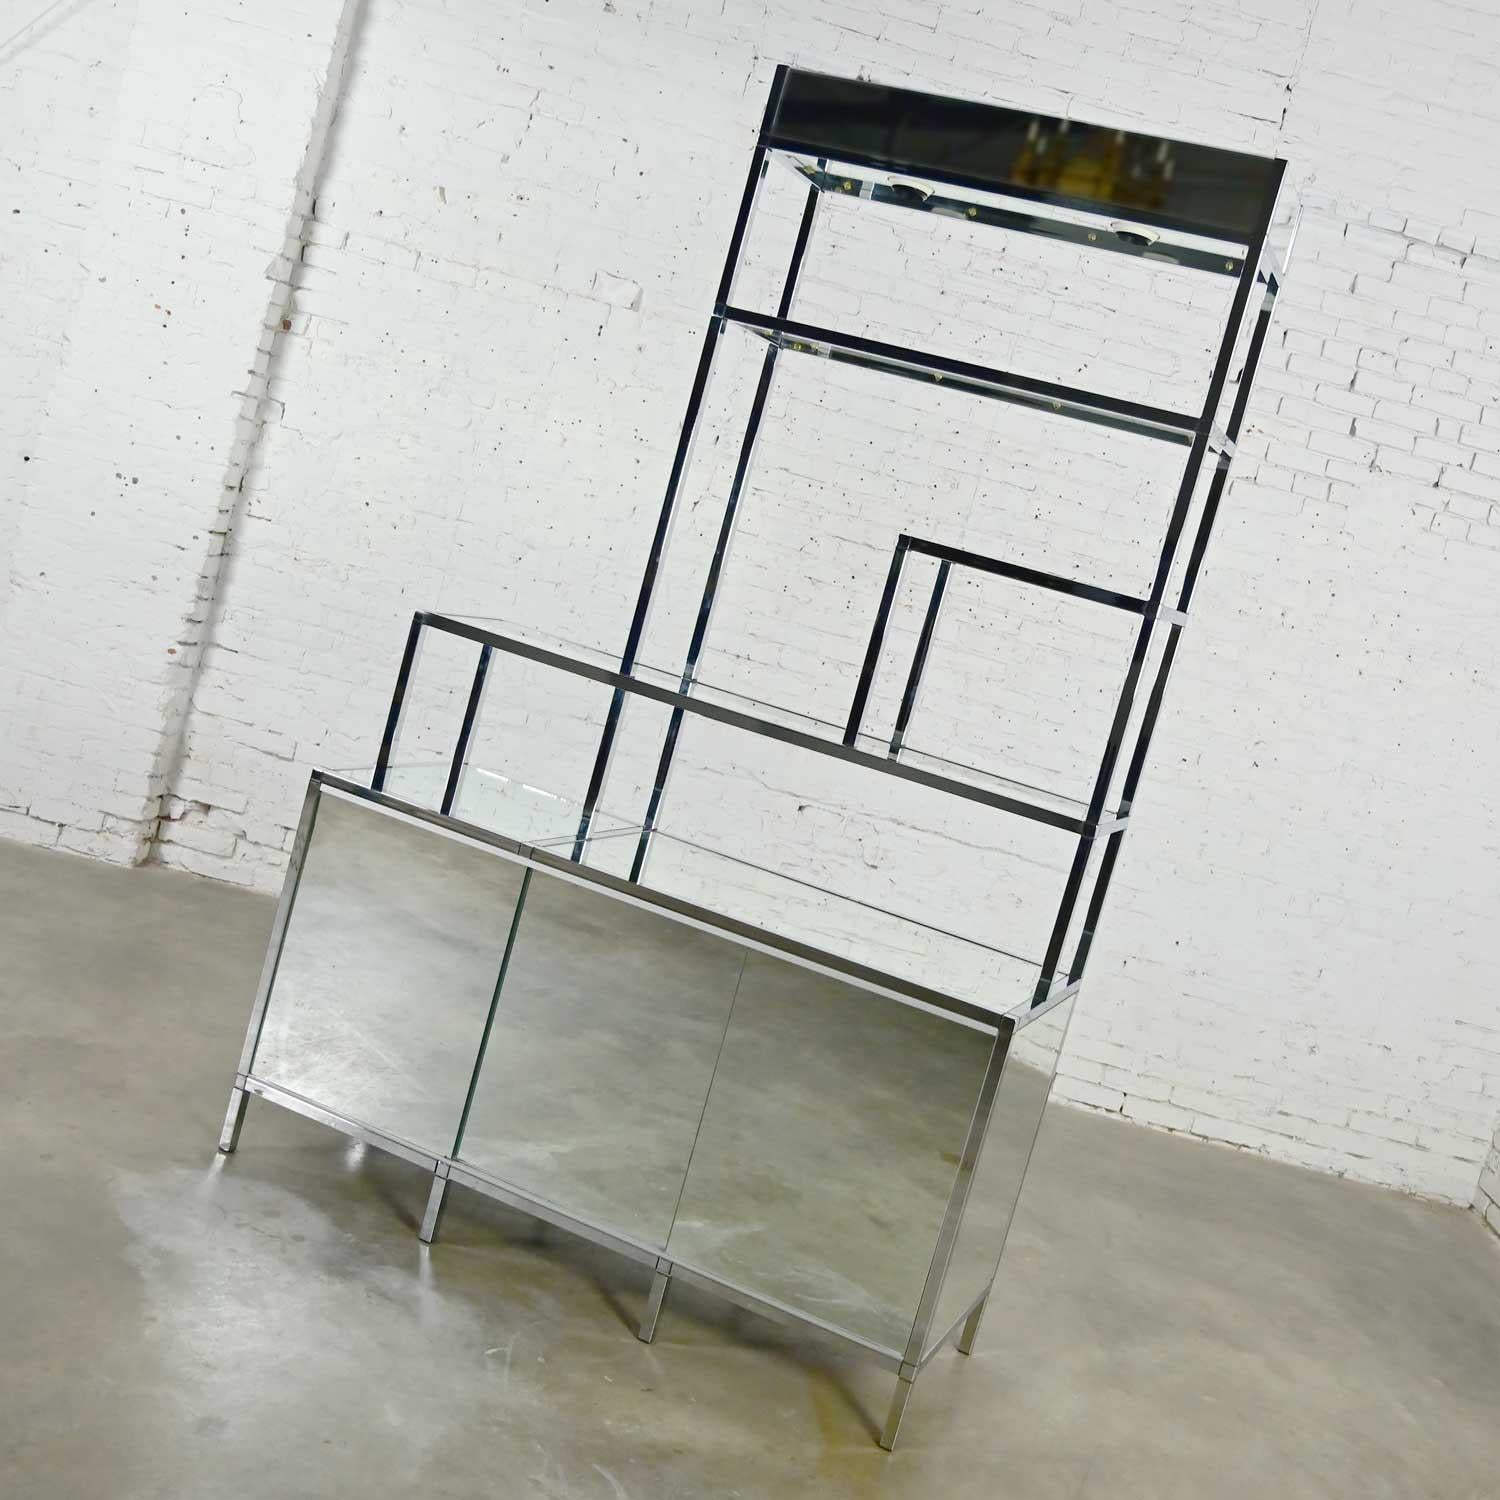 Stunning vintage mid-century modern to modern chrome & mirrored one-piece etagere or room divider with lower enclosed cabinet portion in the style of DIA or Ello. Beautiful condition, keeping in mind that this is vintage and not new so will have